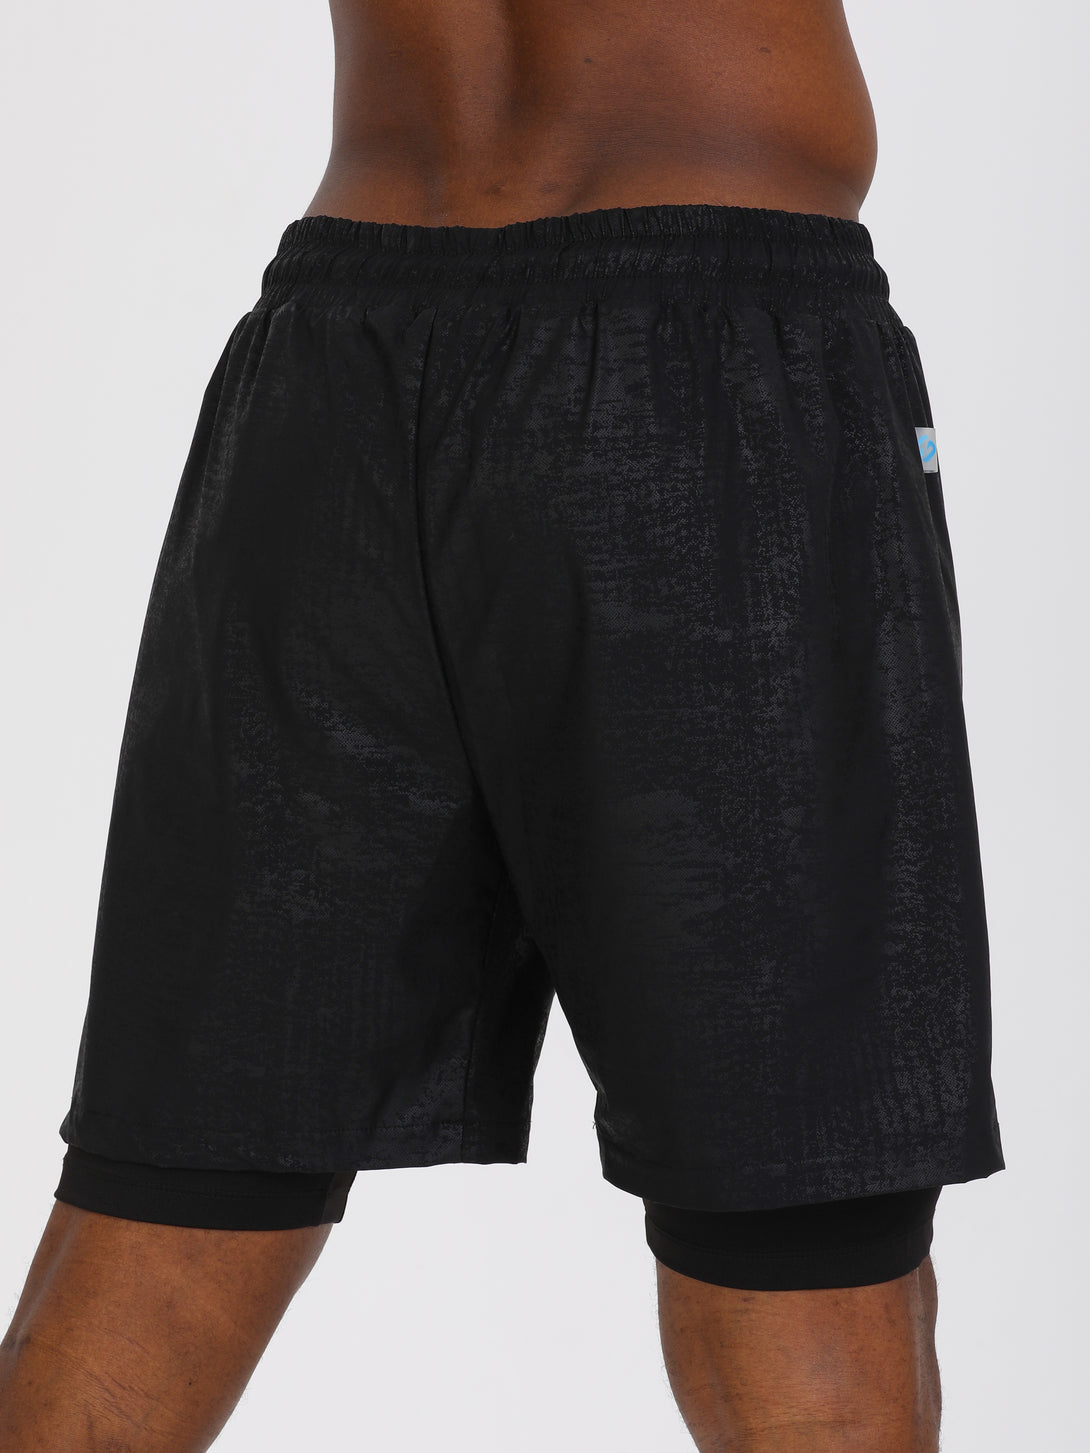 A Man Wearing Black Color Double Layered Mens Shorts